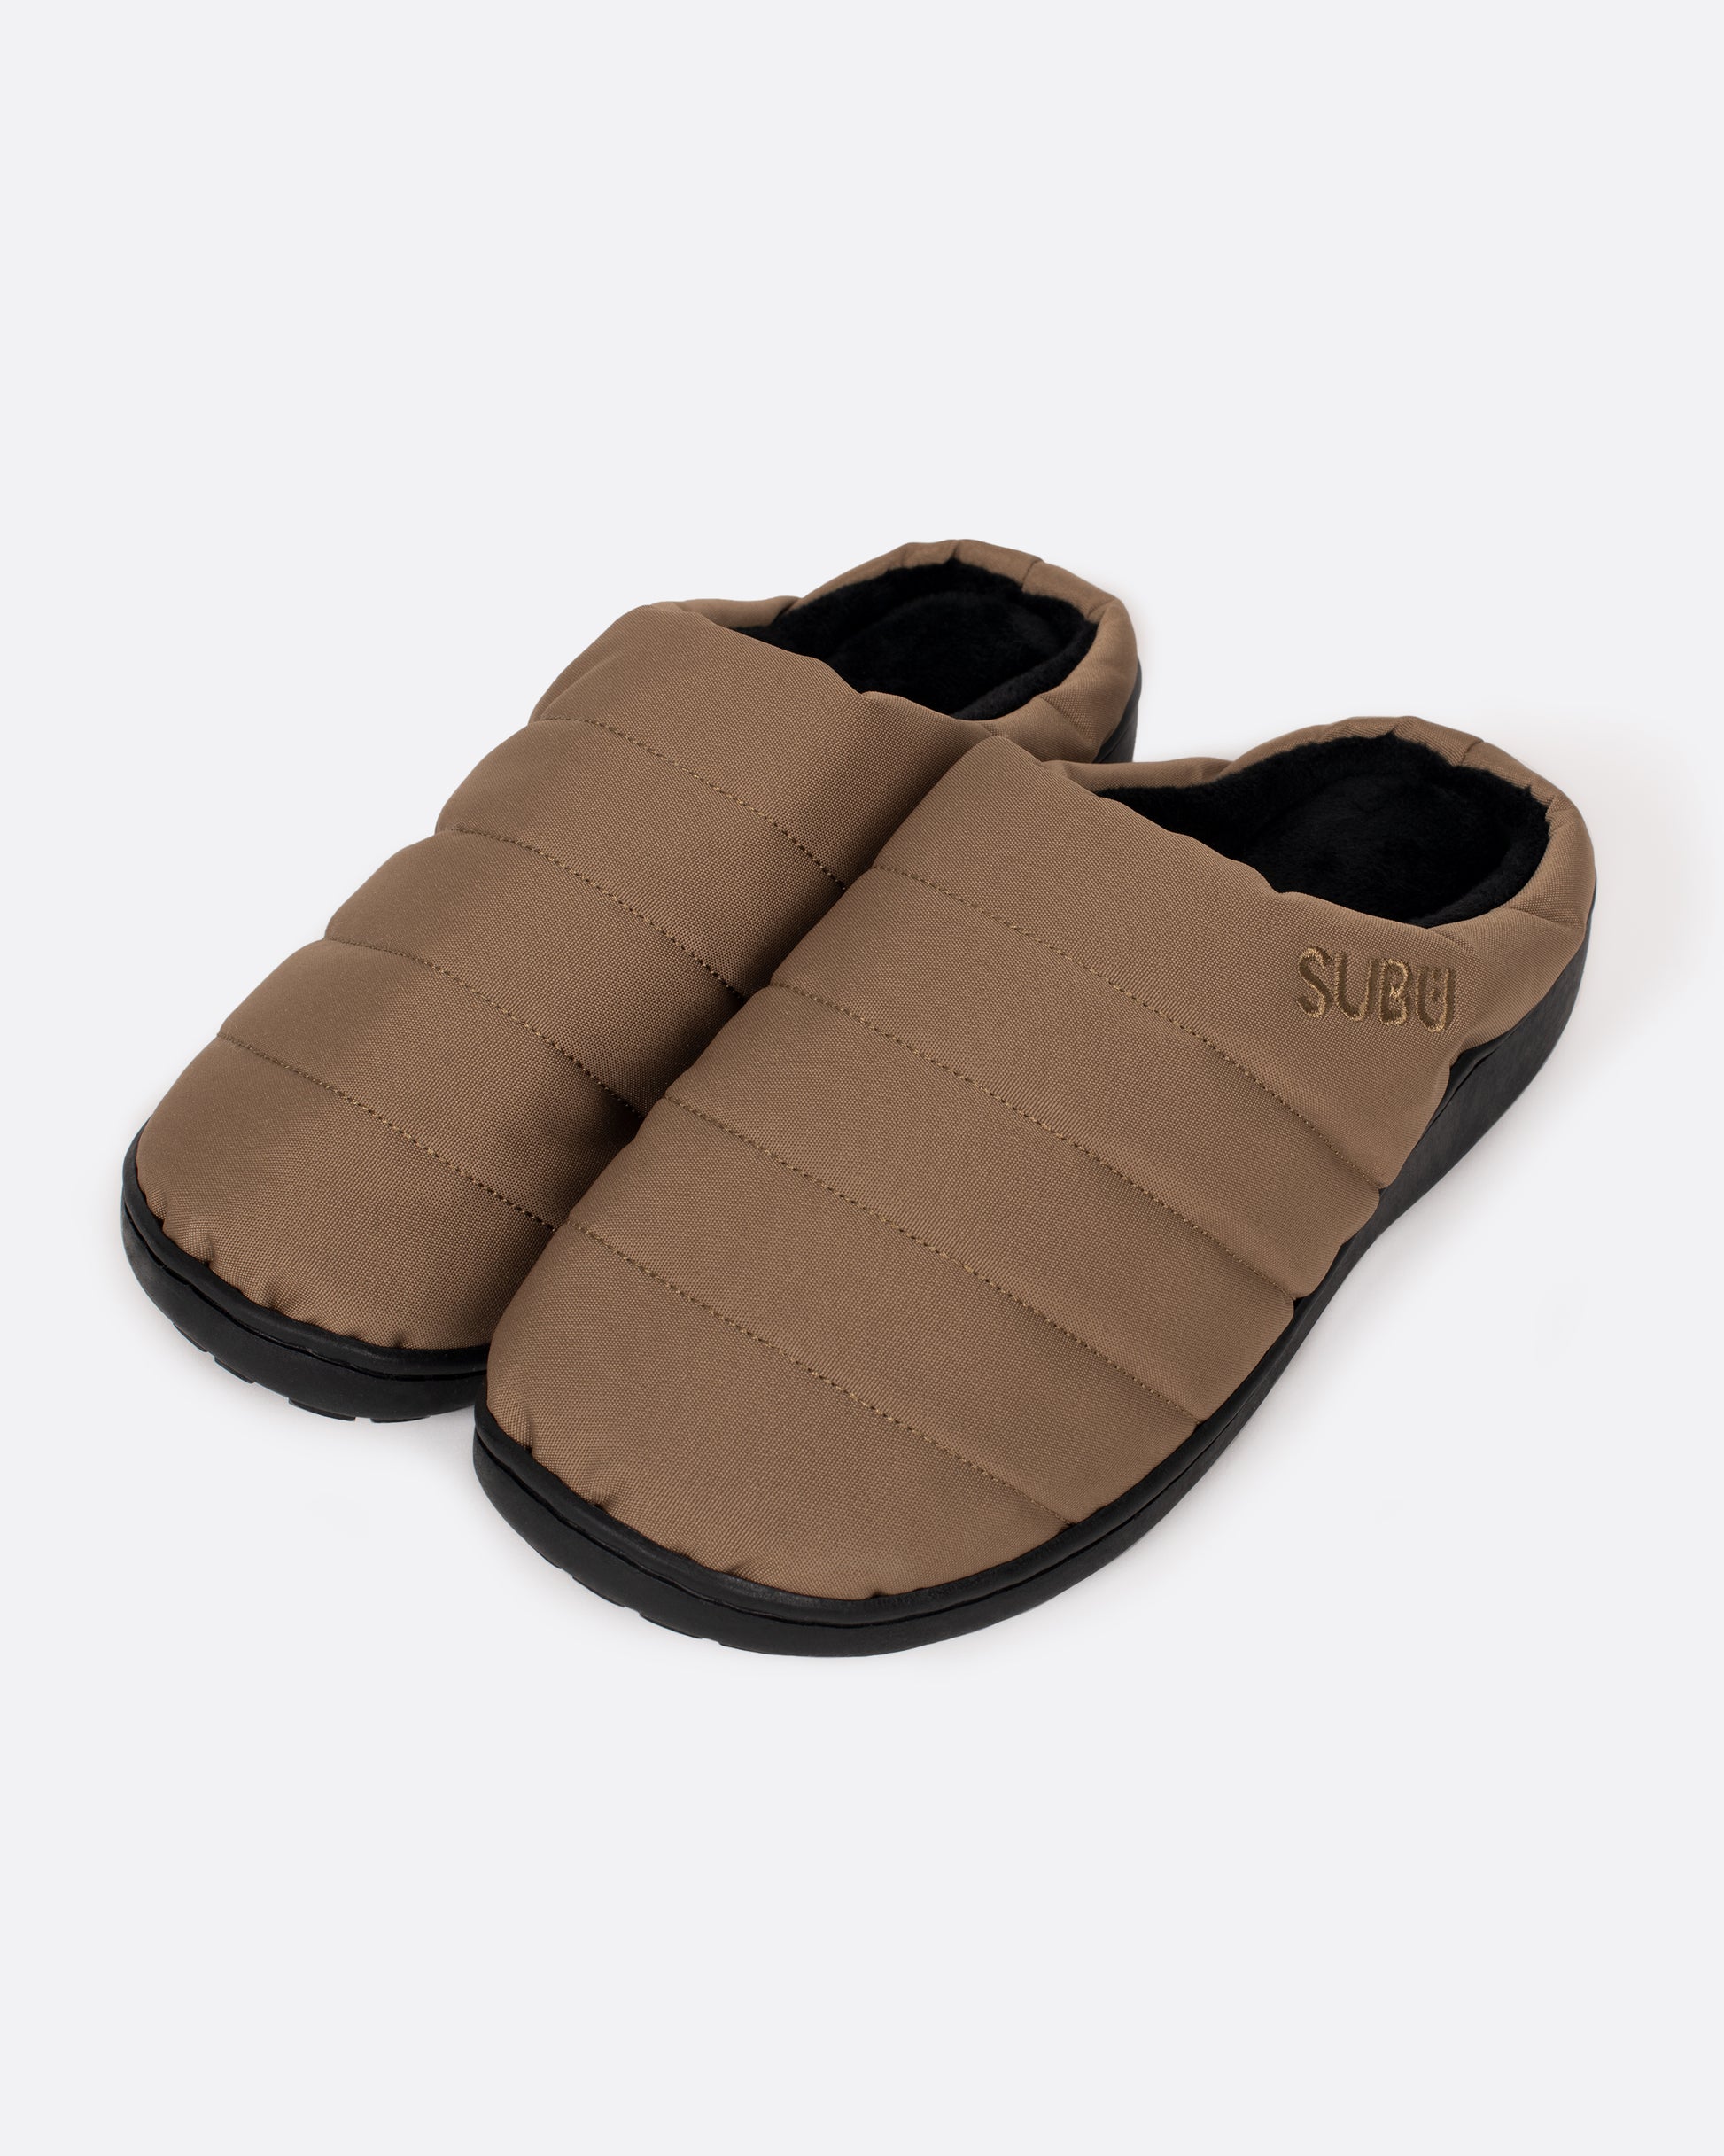 A pair of tan nylon slippers with black rubber soles, shown from the side.